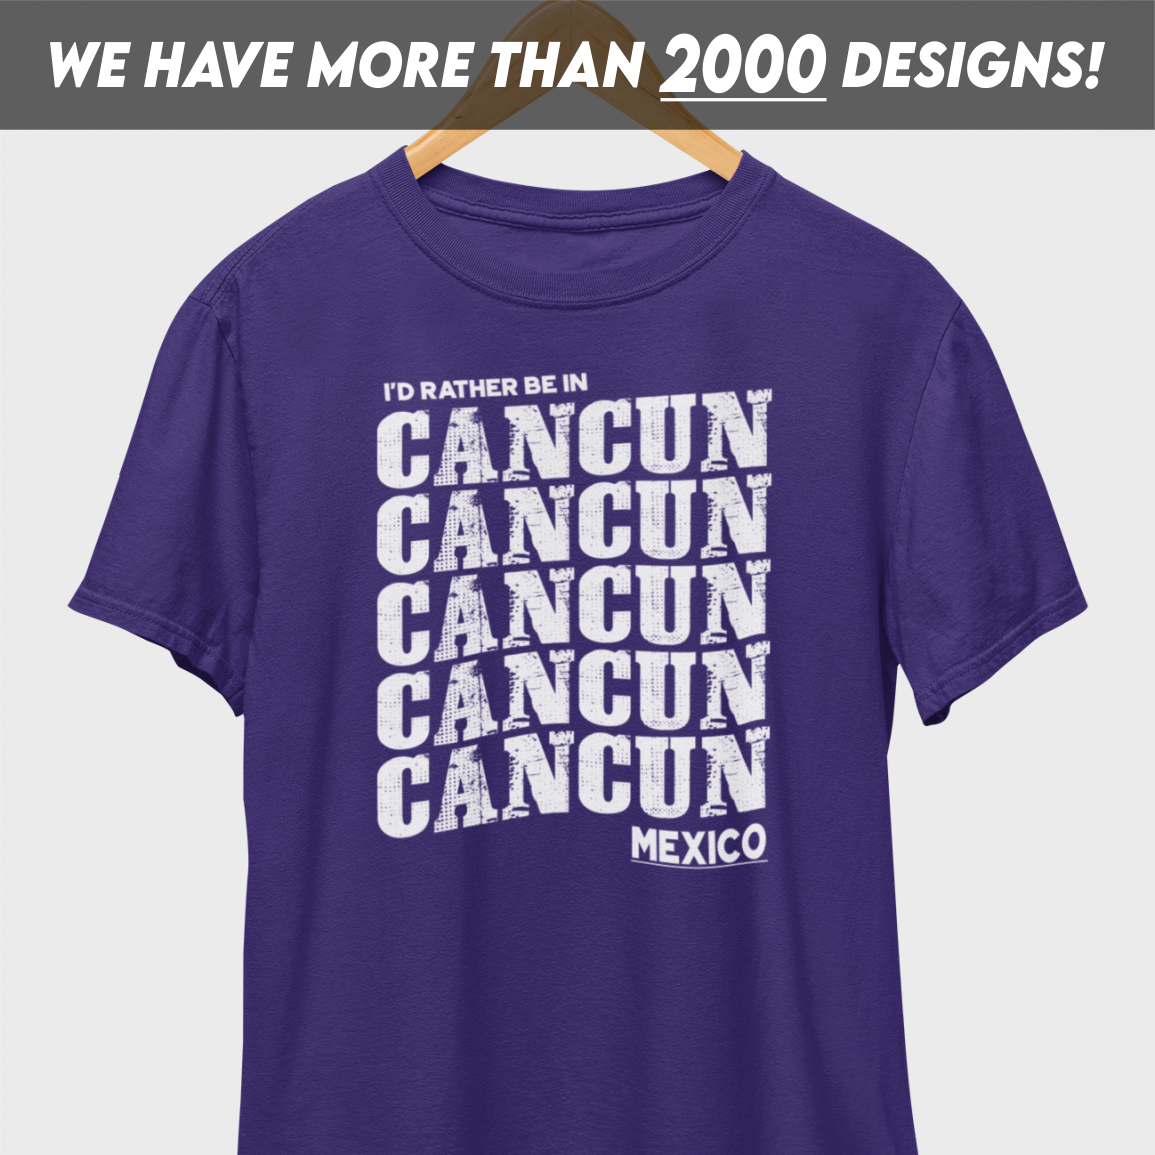 I'd Rather Be Cancun Mexico White Print T-Shirt